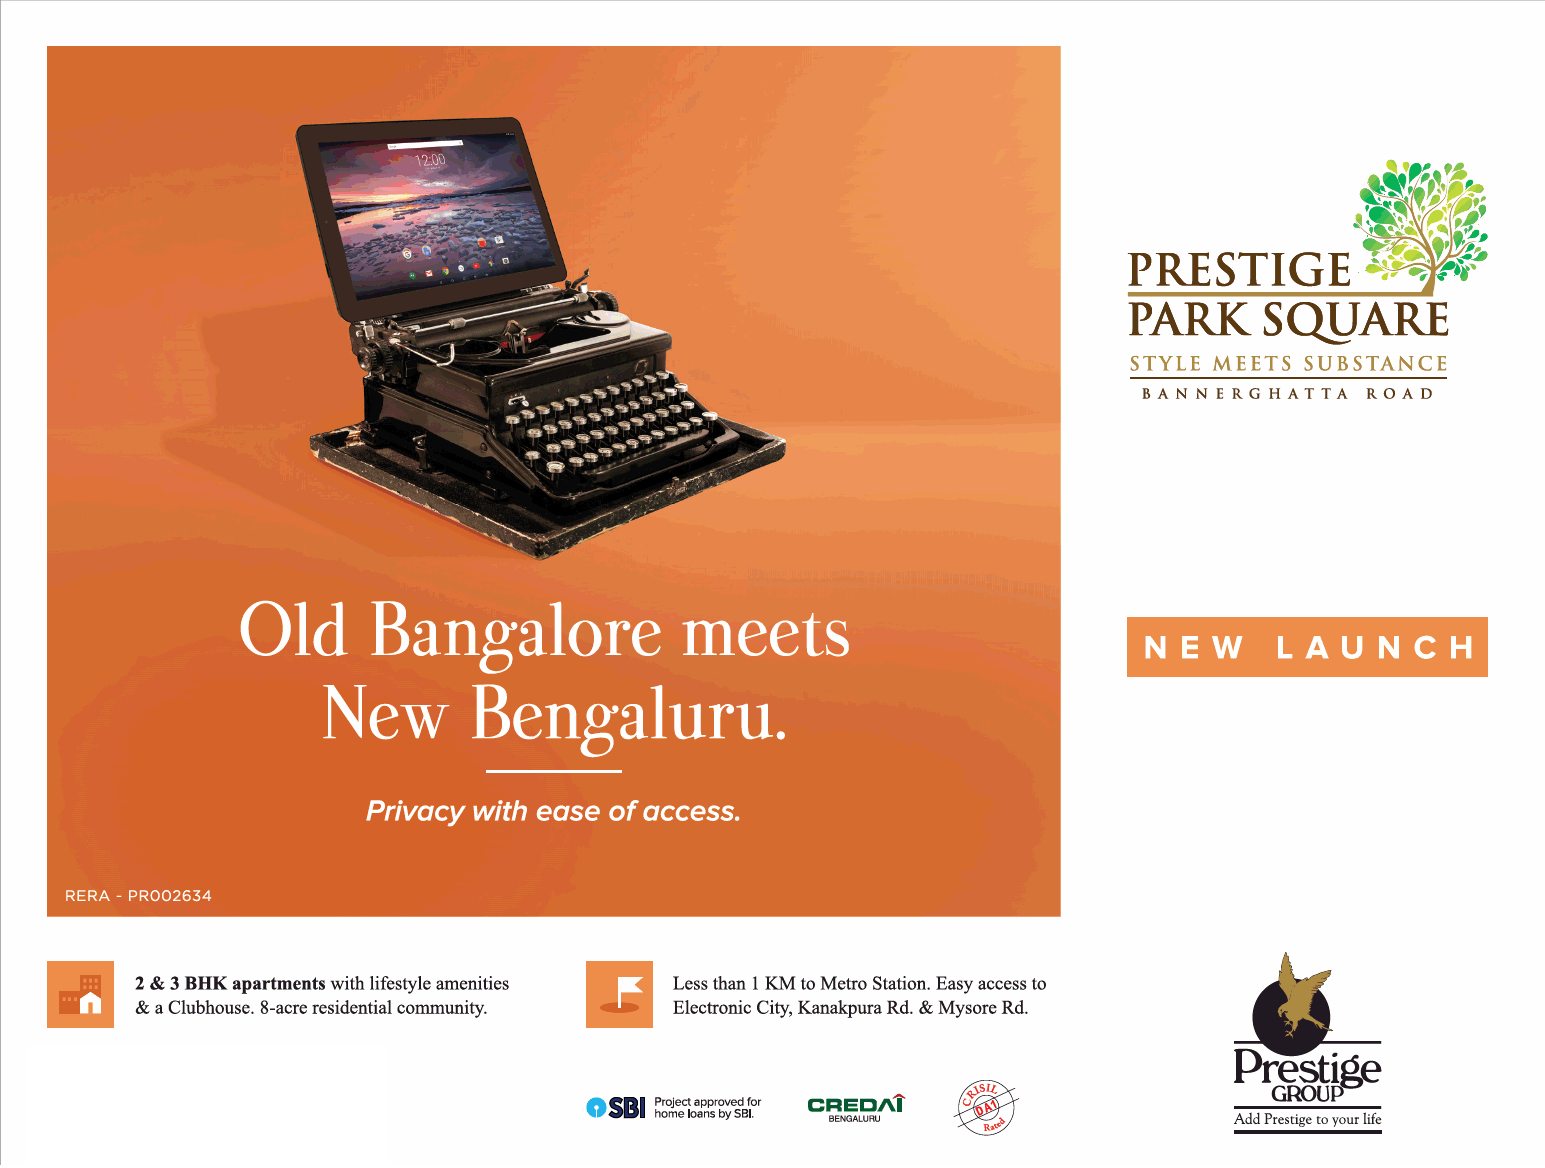 Privacy with ease of access at the new launched Prestige Park Square in Bangalore Update